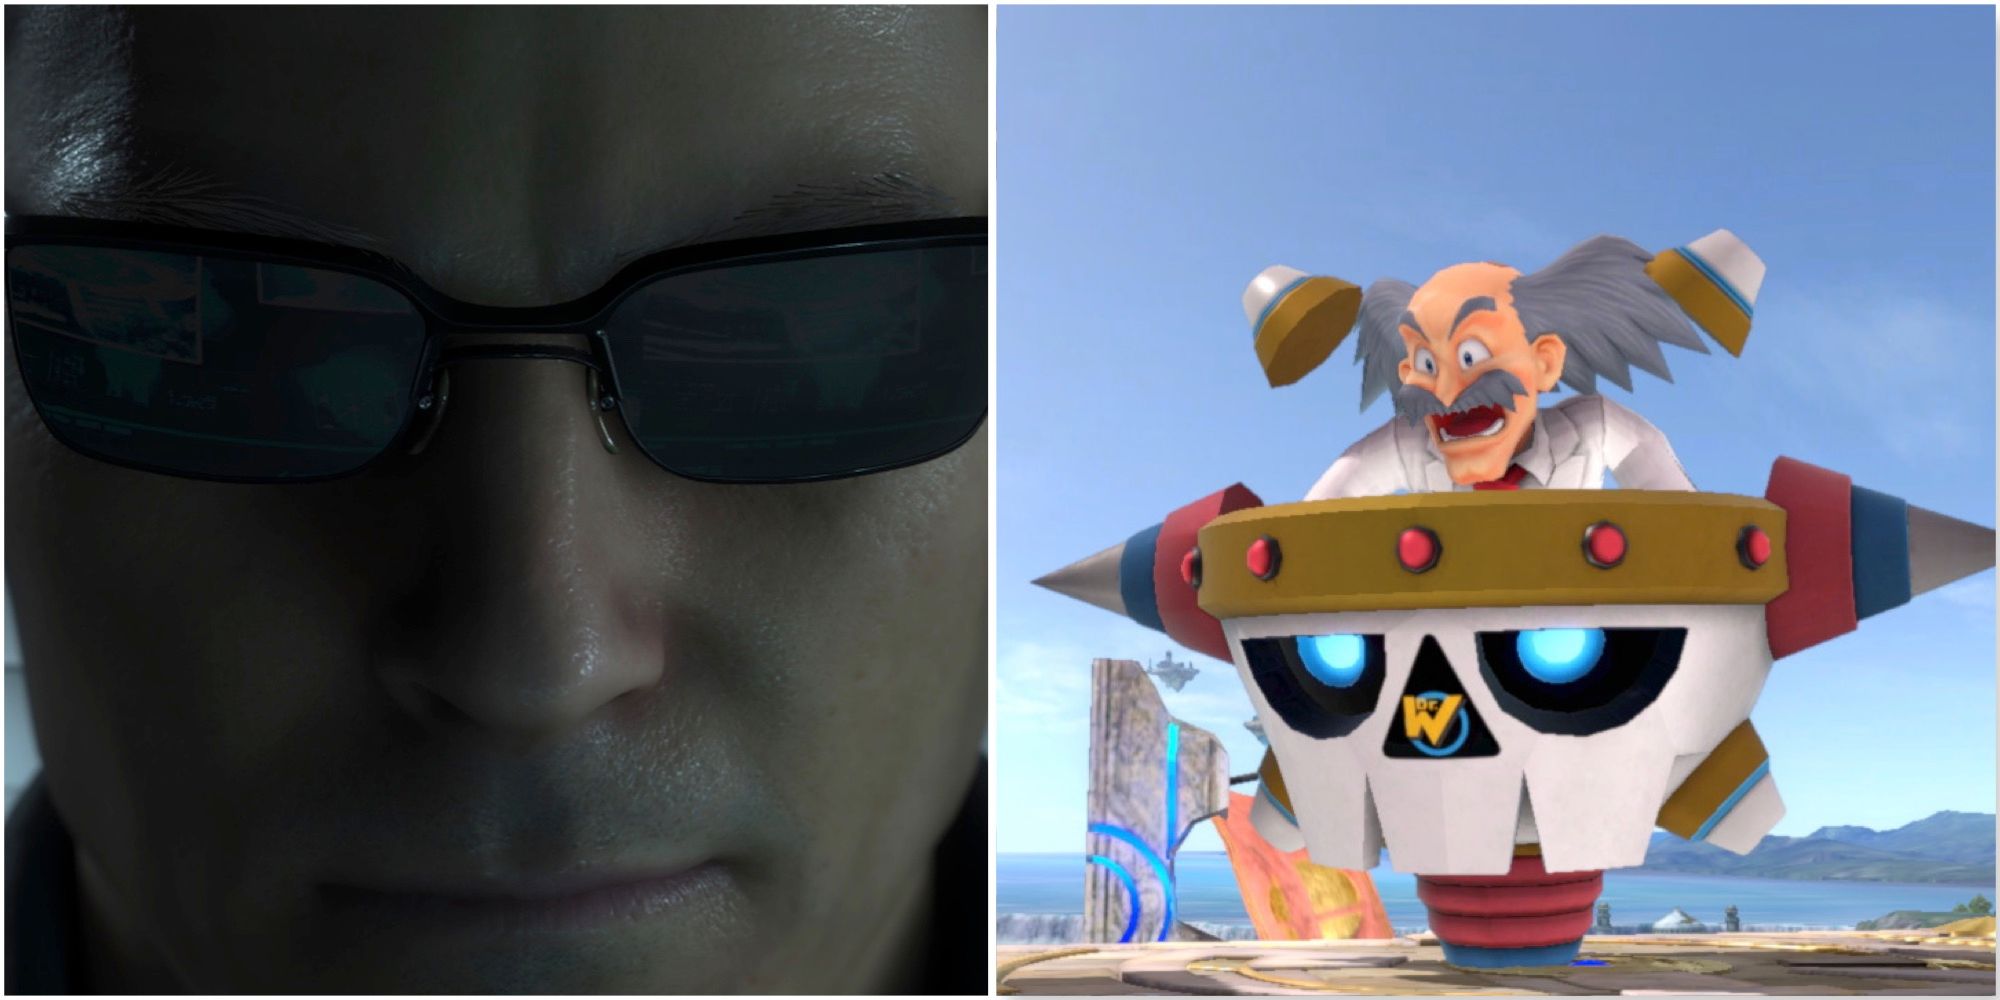 Wesker in the Resident Evil 4 remake and Dr. Wily from Mega Man